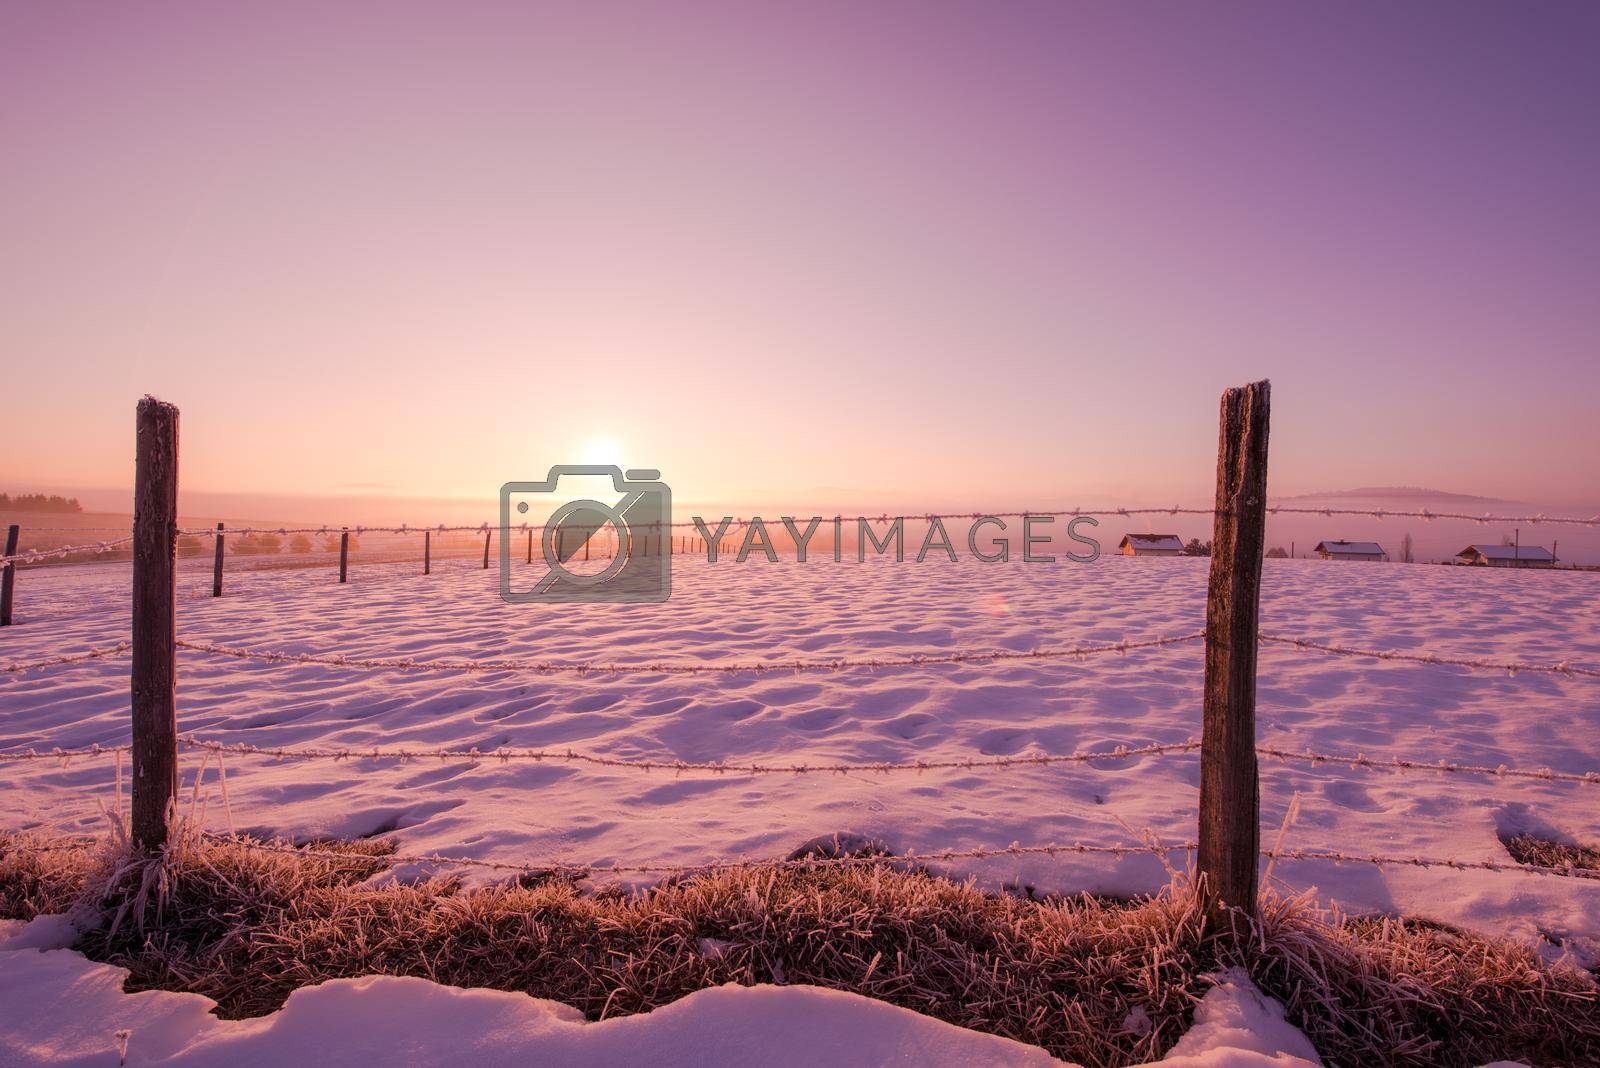 winter landscape scenic   fresh snow  against purple violet  sky with long shadows on beautiful fresh morning